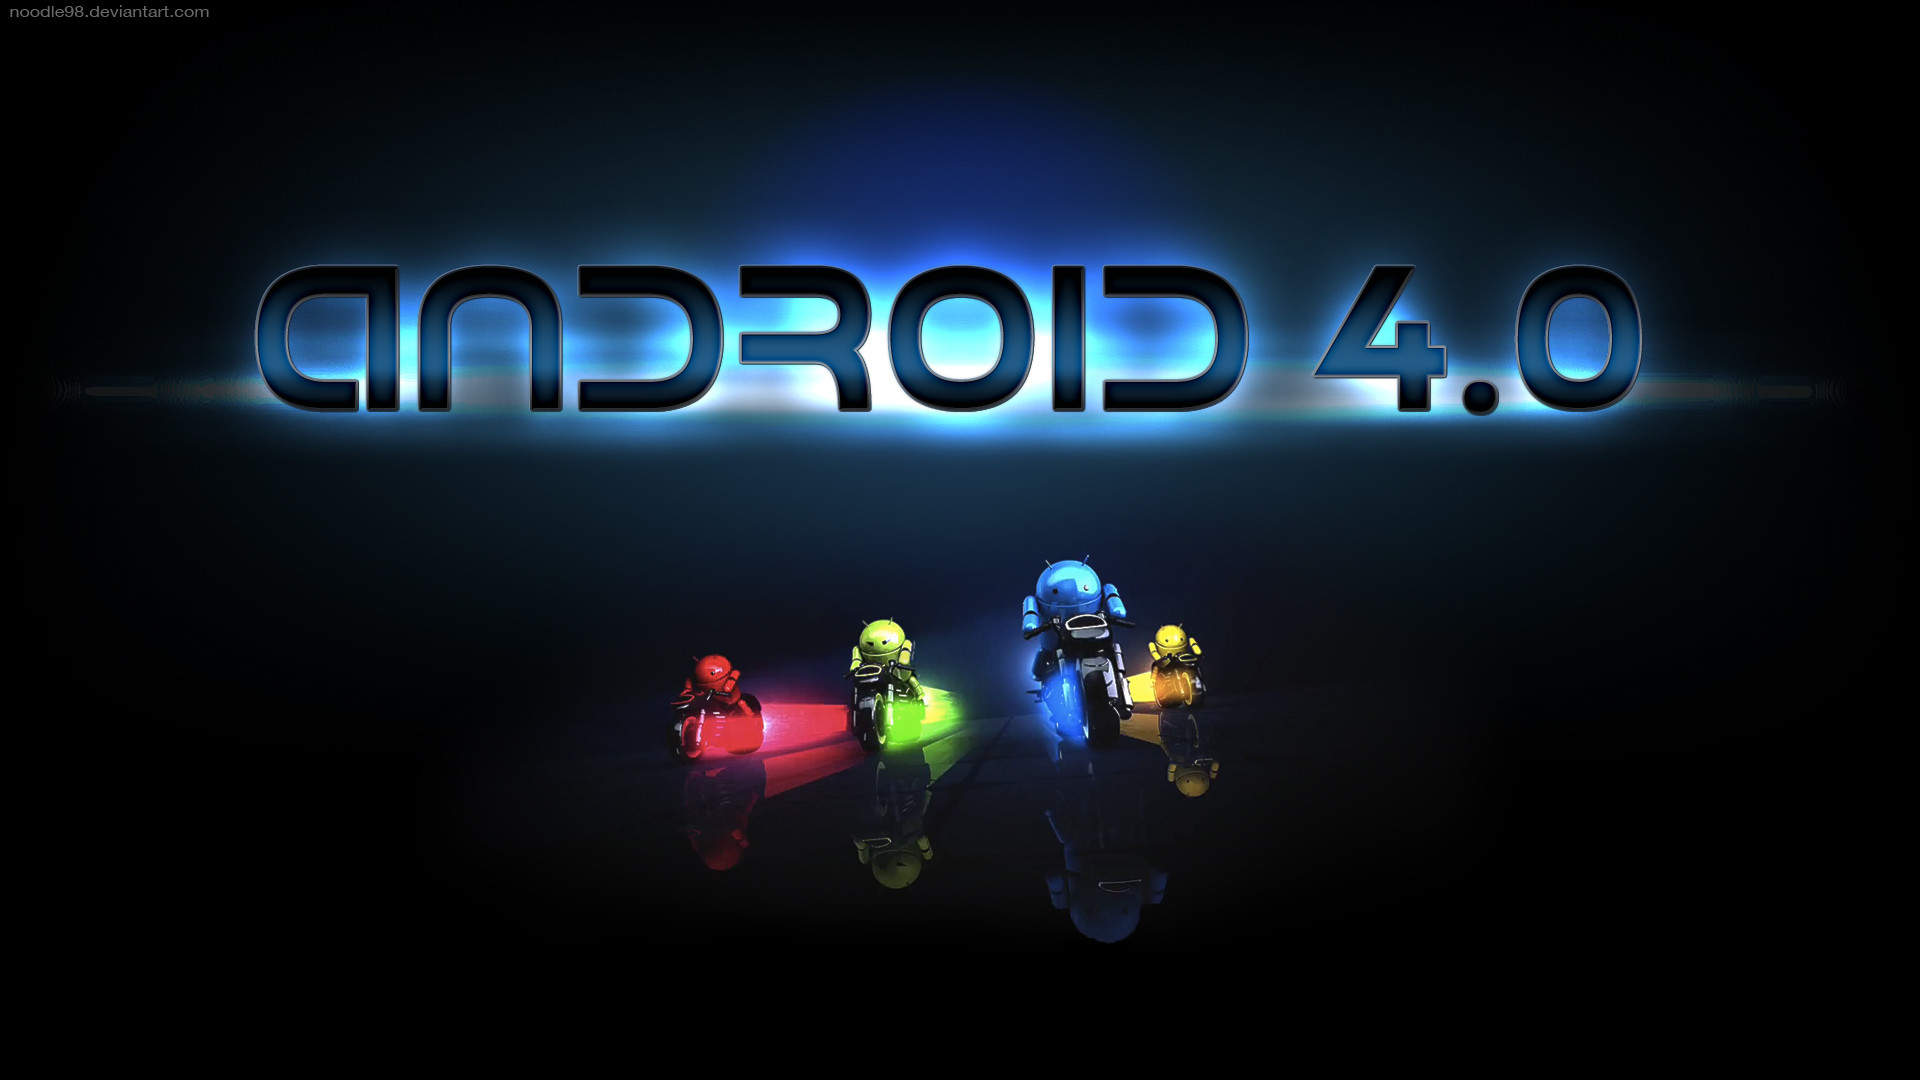 1920x1080 Fonds dcran Android 4 tous les wallpapers Android 4 